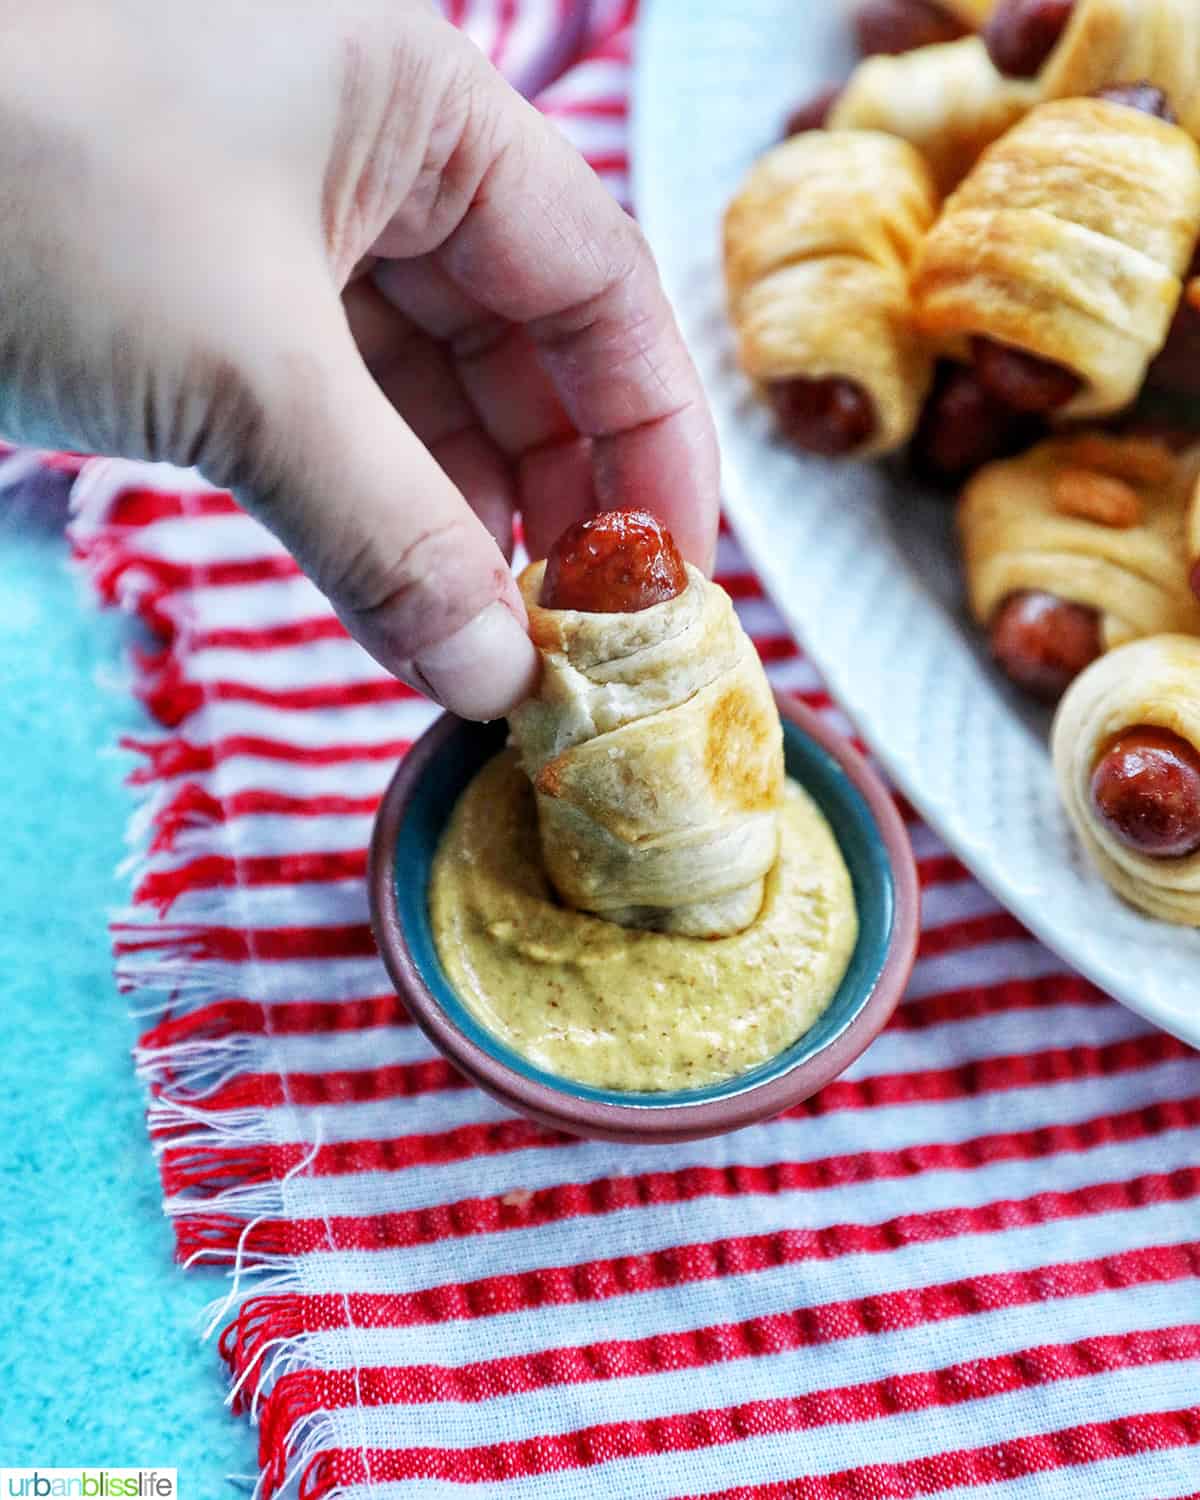 a hand dipping Air Fryer Pigs in a Blanket into mustard on a red and white napkin with several pigs-in-a-blanket on a plate.